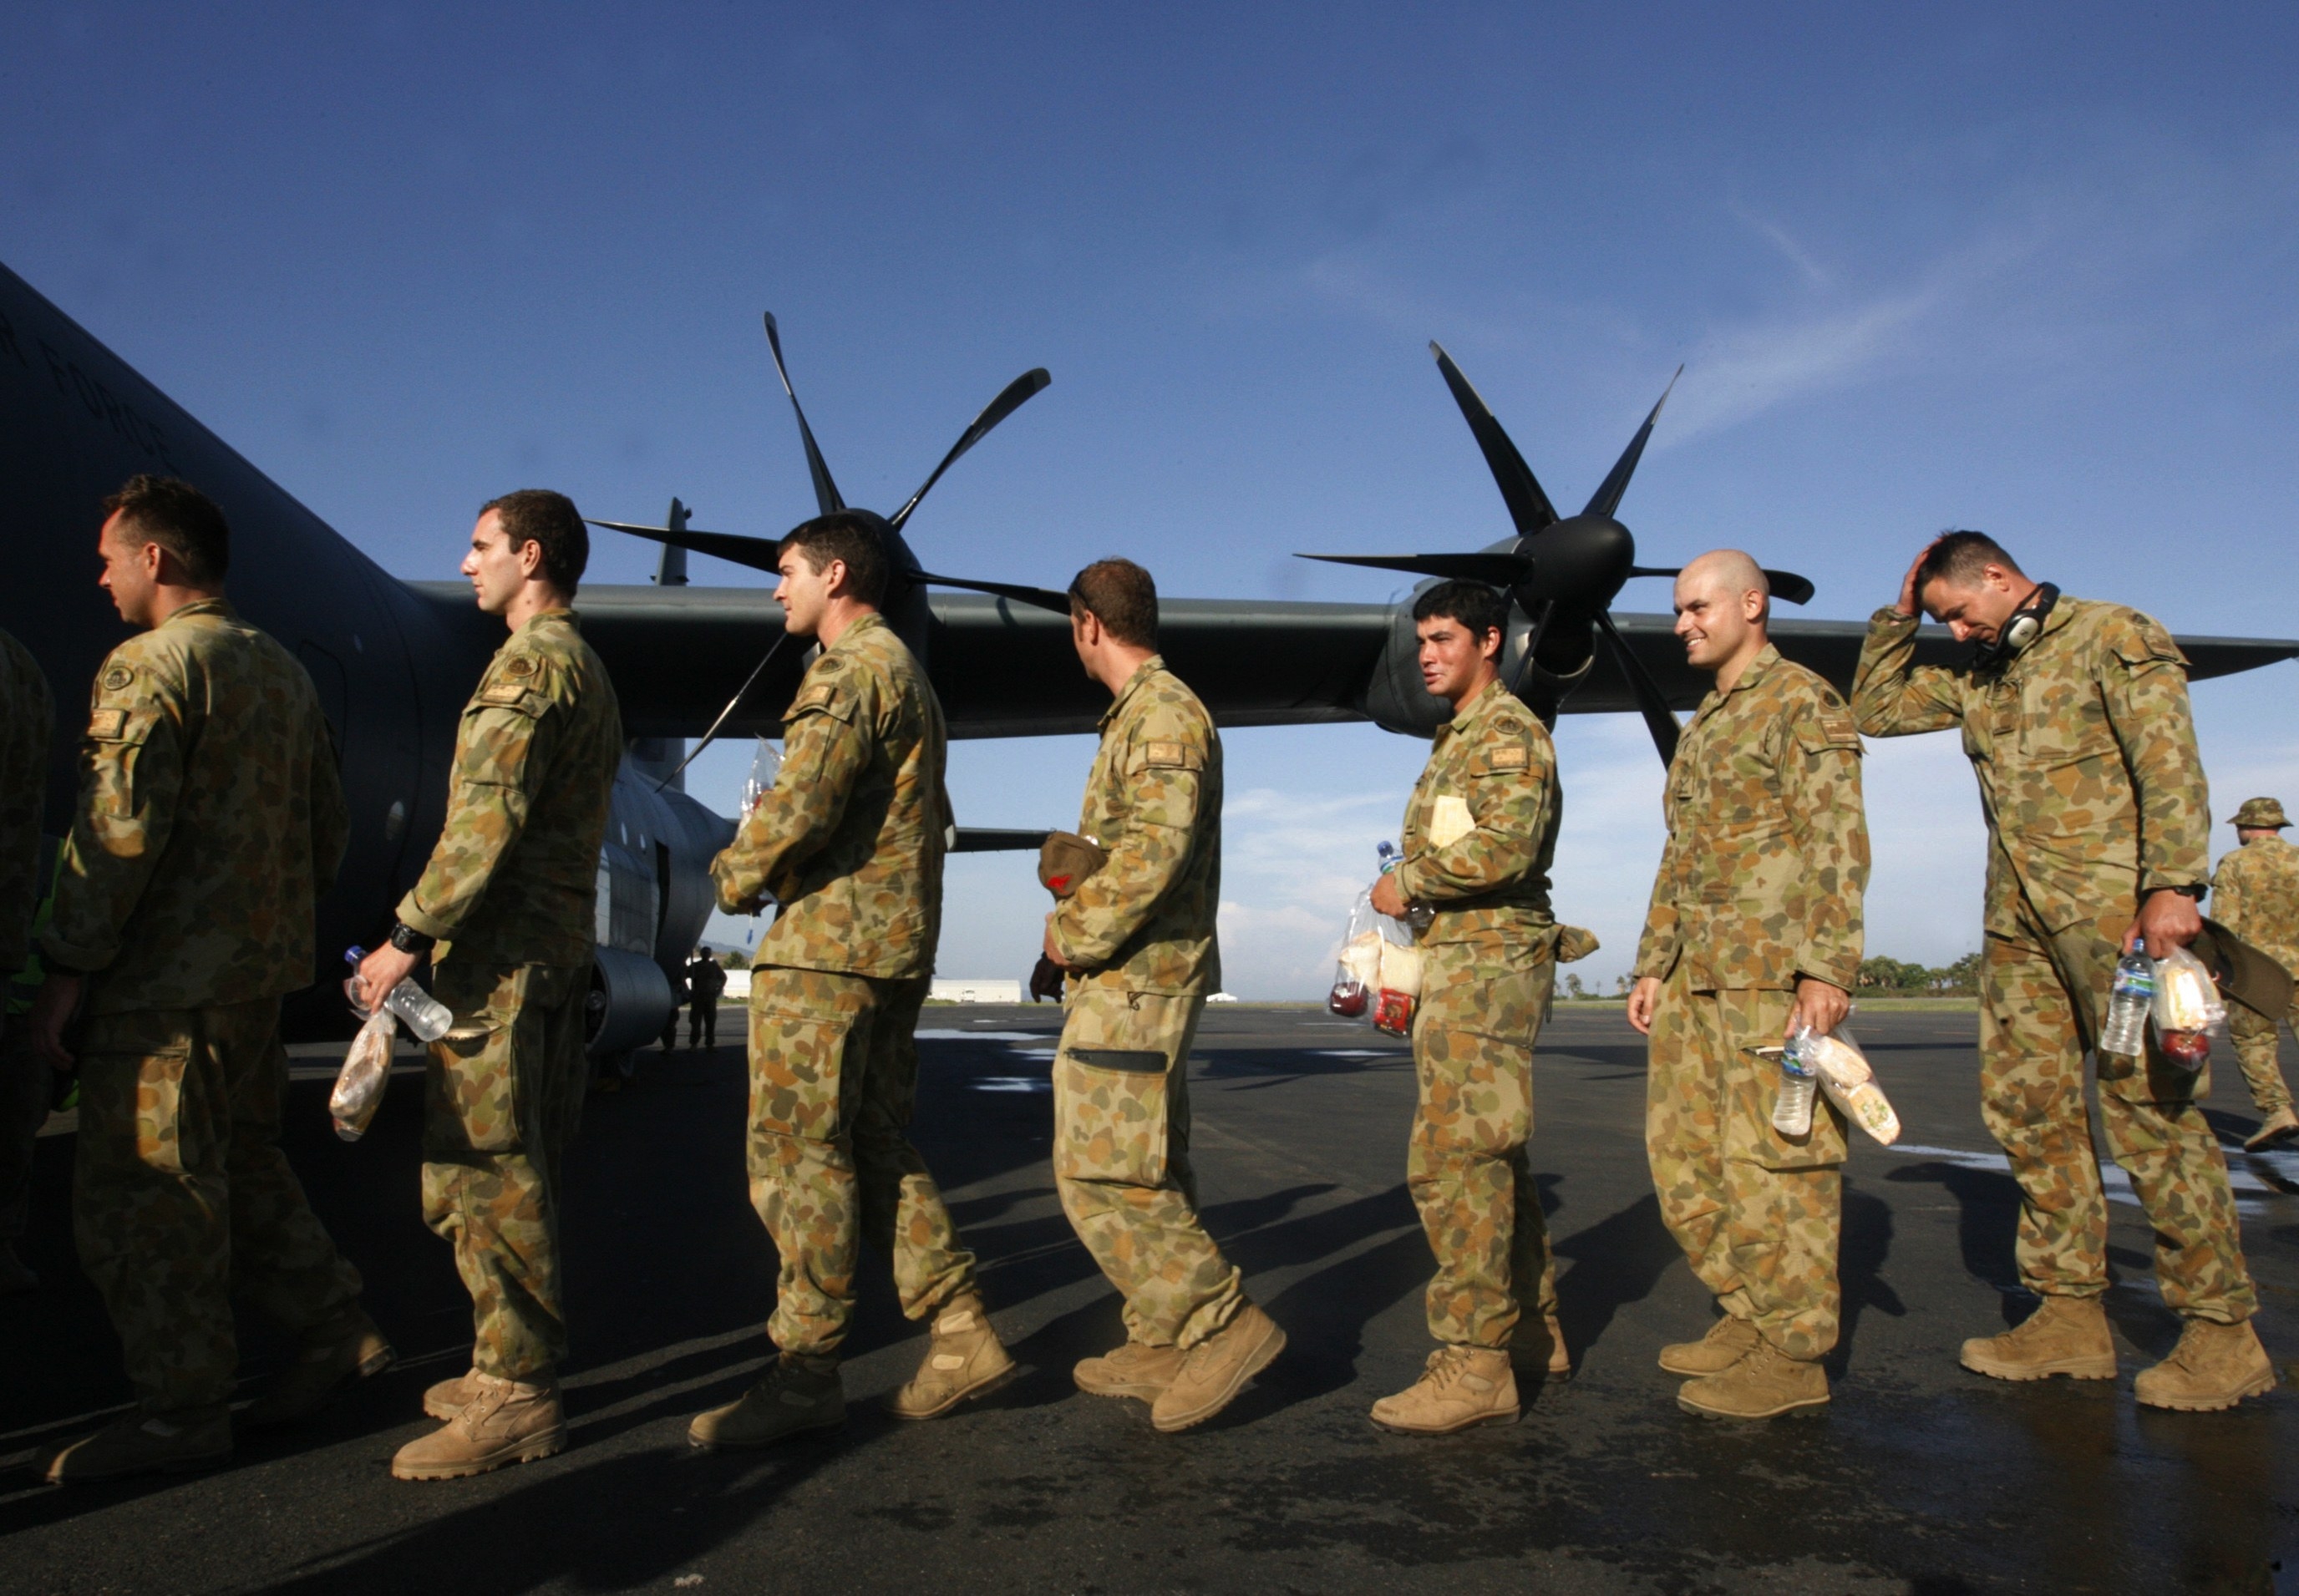 Australian soldiers returning home are serving in East Timor. Recently, the Australian army has faced sex scandals, including allegations of abuse. Photo: AFP